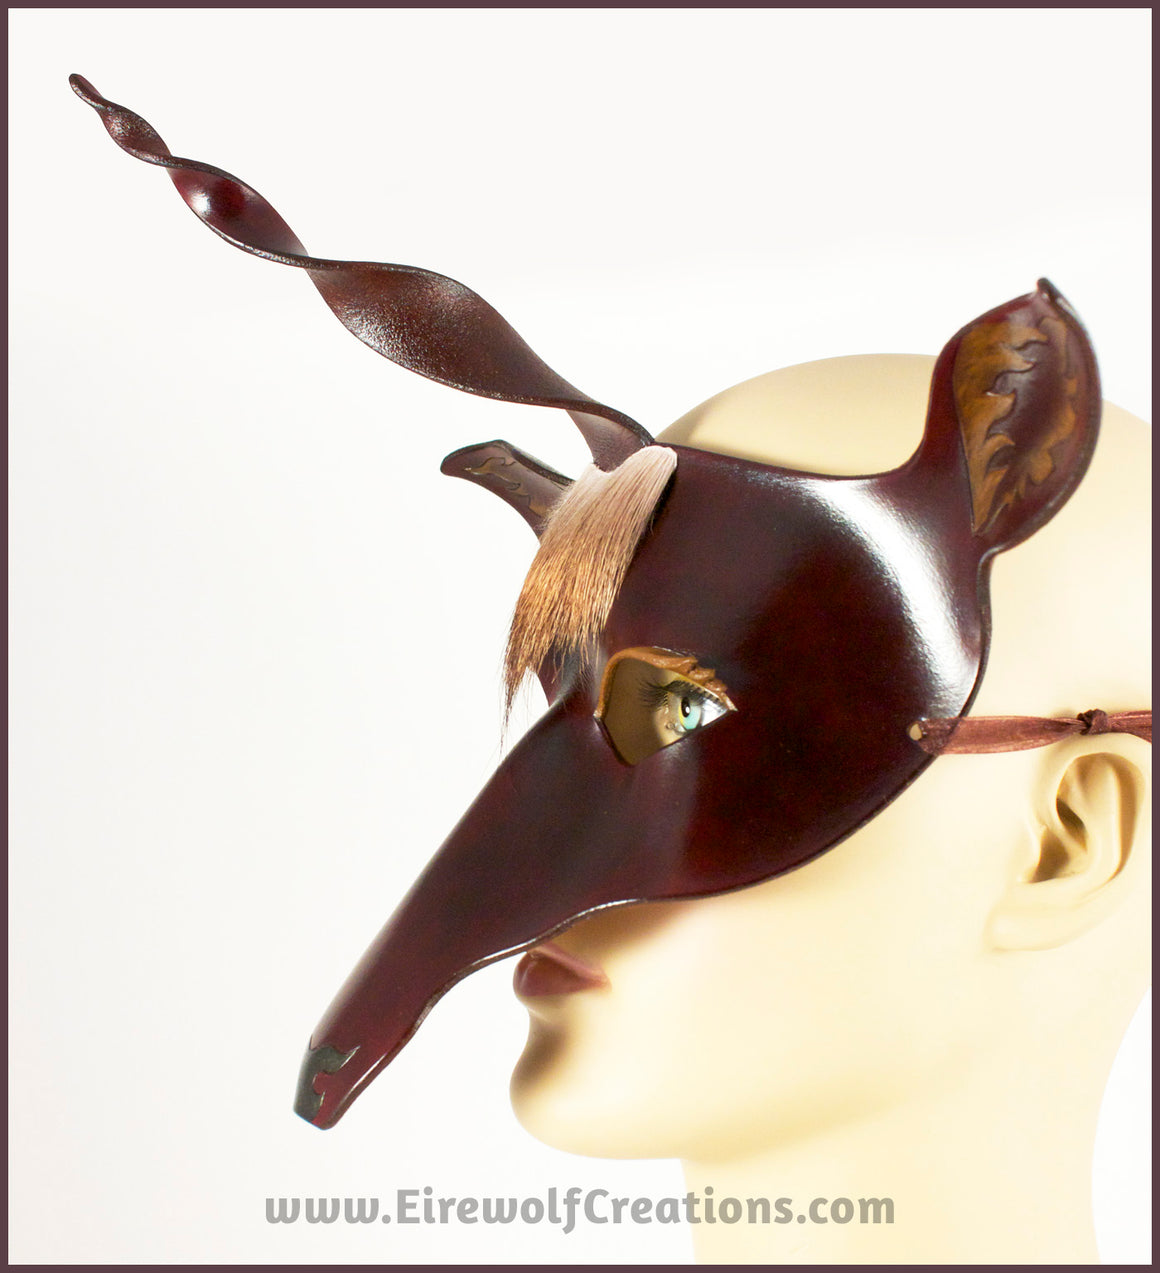 The Dark Forest Unicorn is a dark brown handmade leather masquerade mask of a deerlike unicorn with real deer hair as a forelock. By Erin Metcalf of Eirewolf Creations.